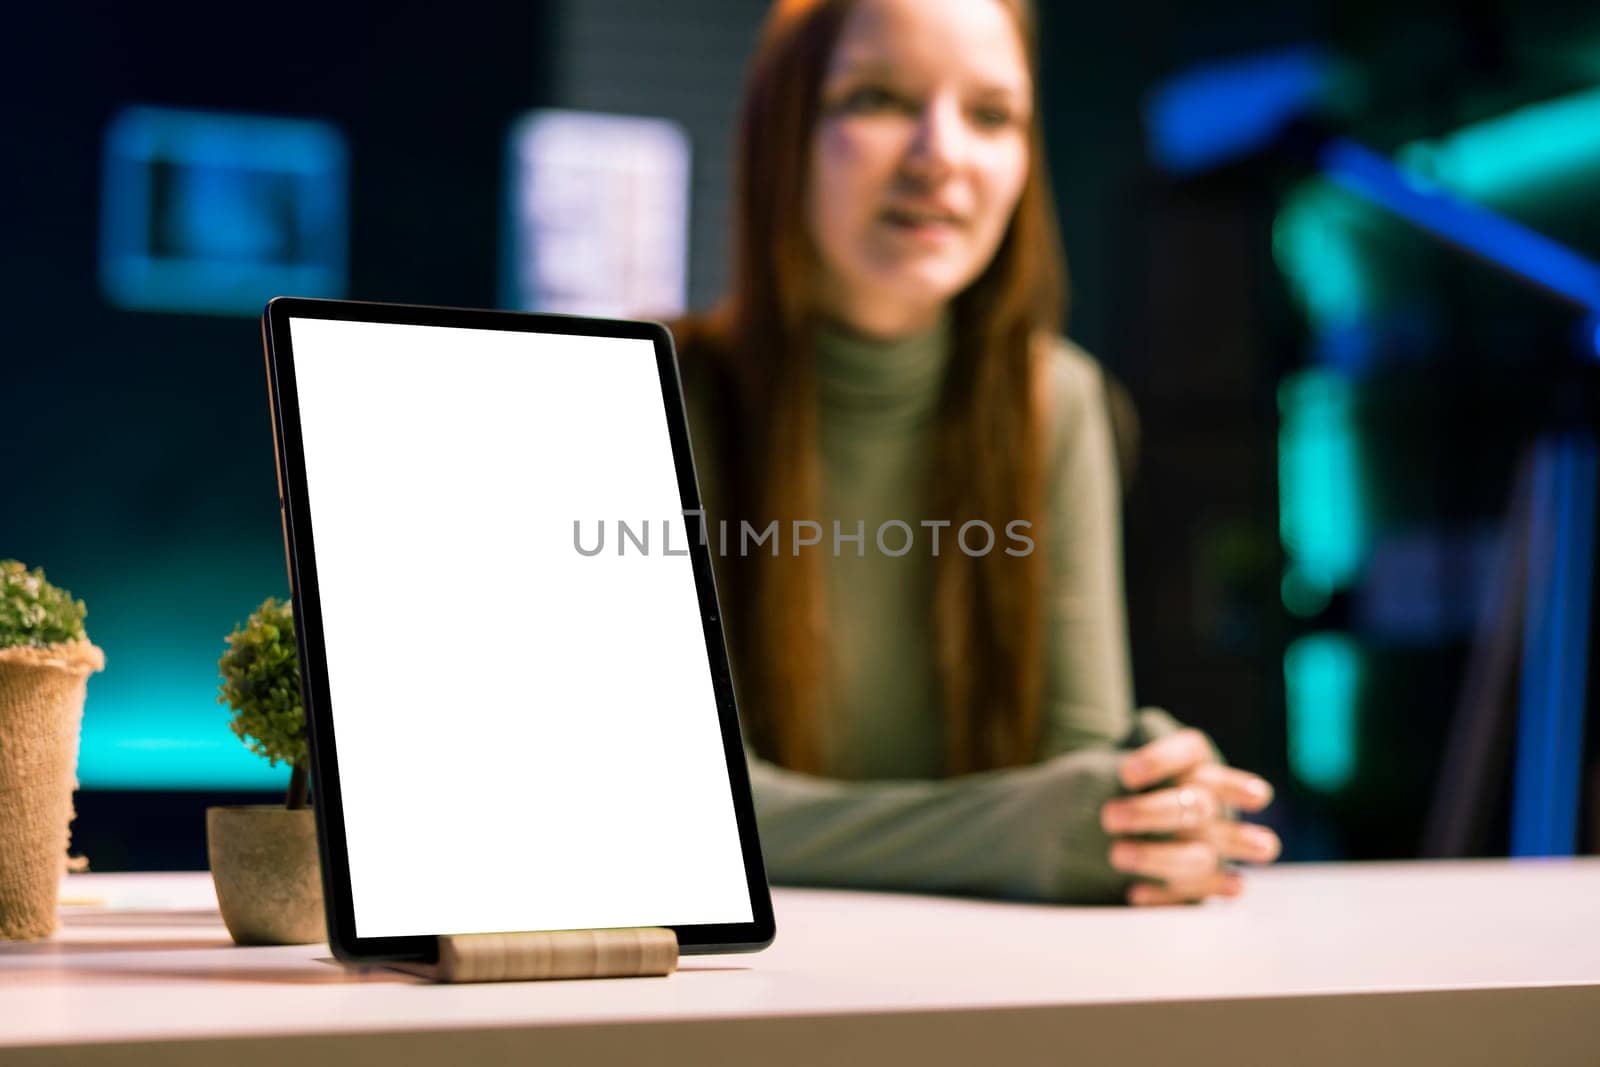 Focus on mockup tablet with gen Z teenager in blurry background doing review, comparing features. Close up shot of isolated screen portable device analyzed by influencer, filming online video